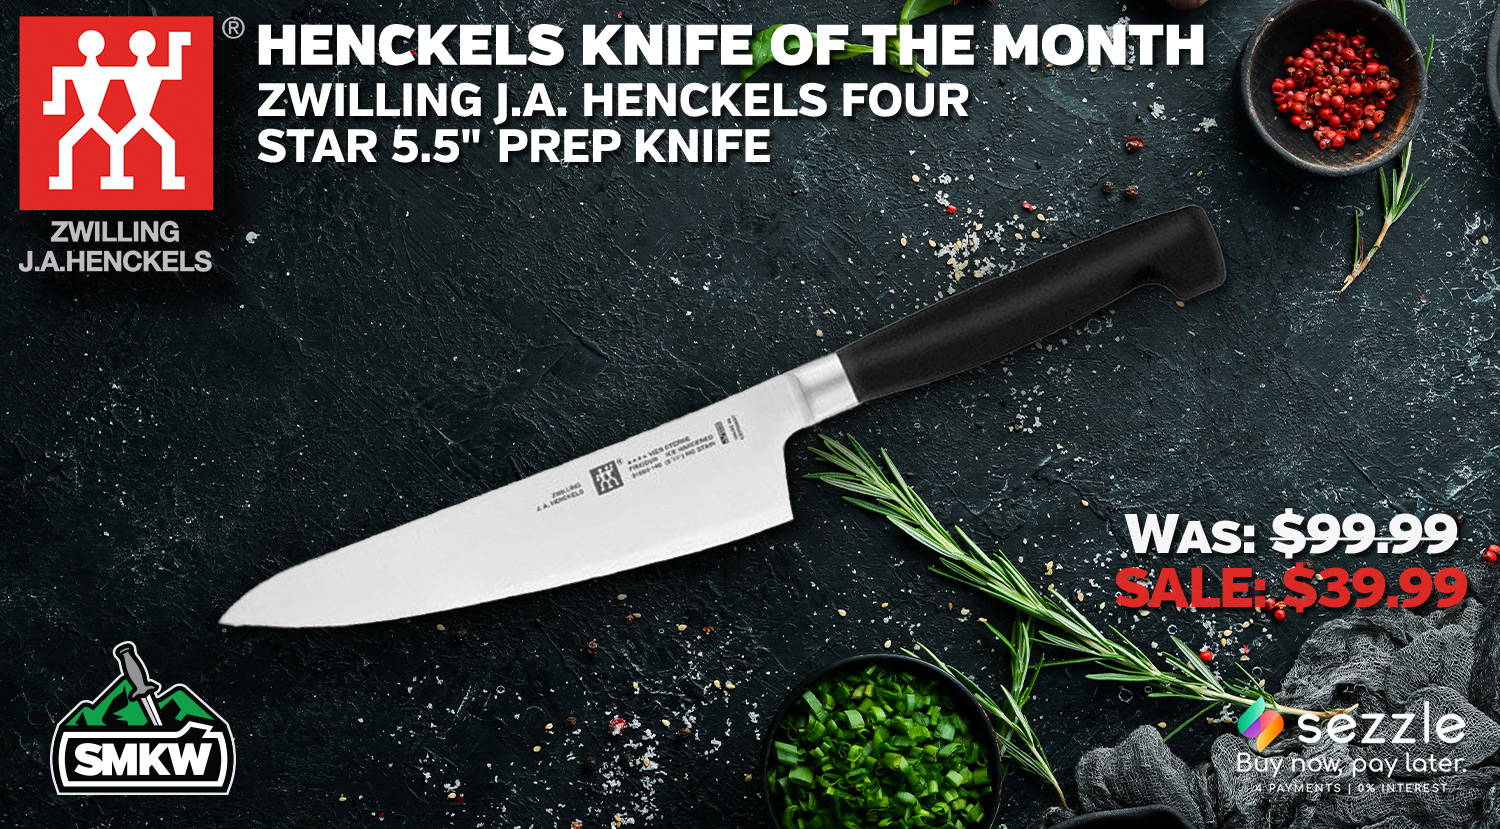 Henckels Knife of the Month Sale Four Star 5.5